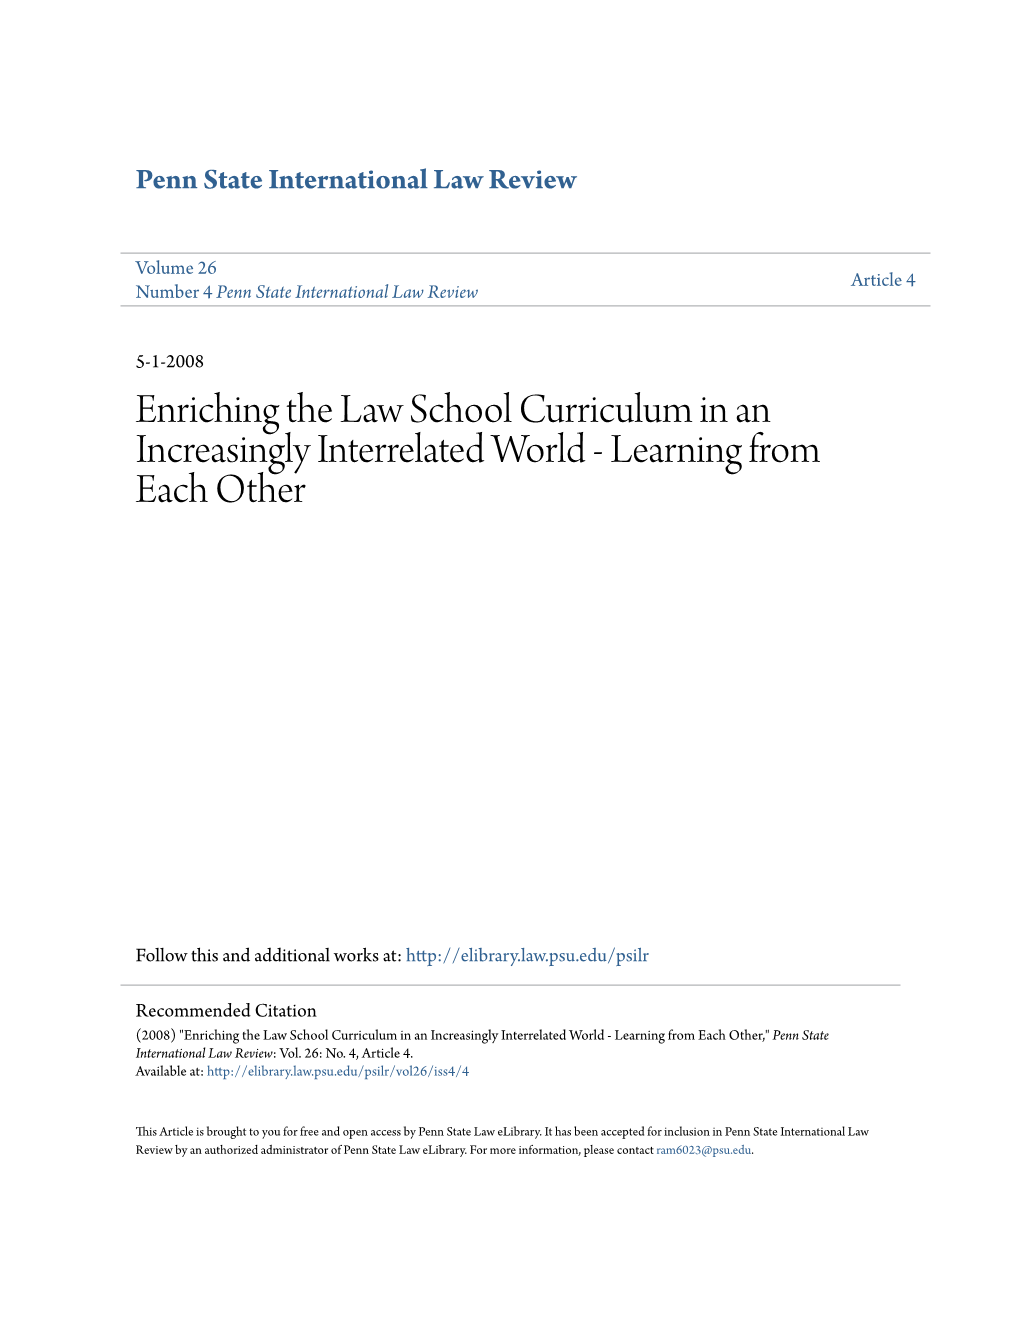 Enriching the Law School Curriculum in an Increasingly Interrelated World - Learning from Each Other